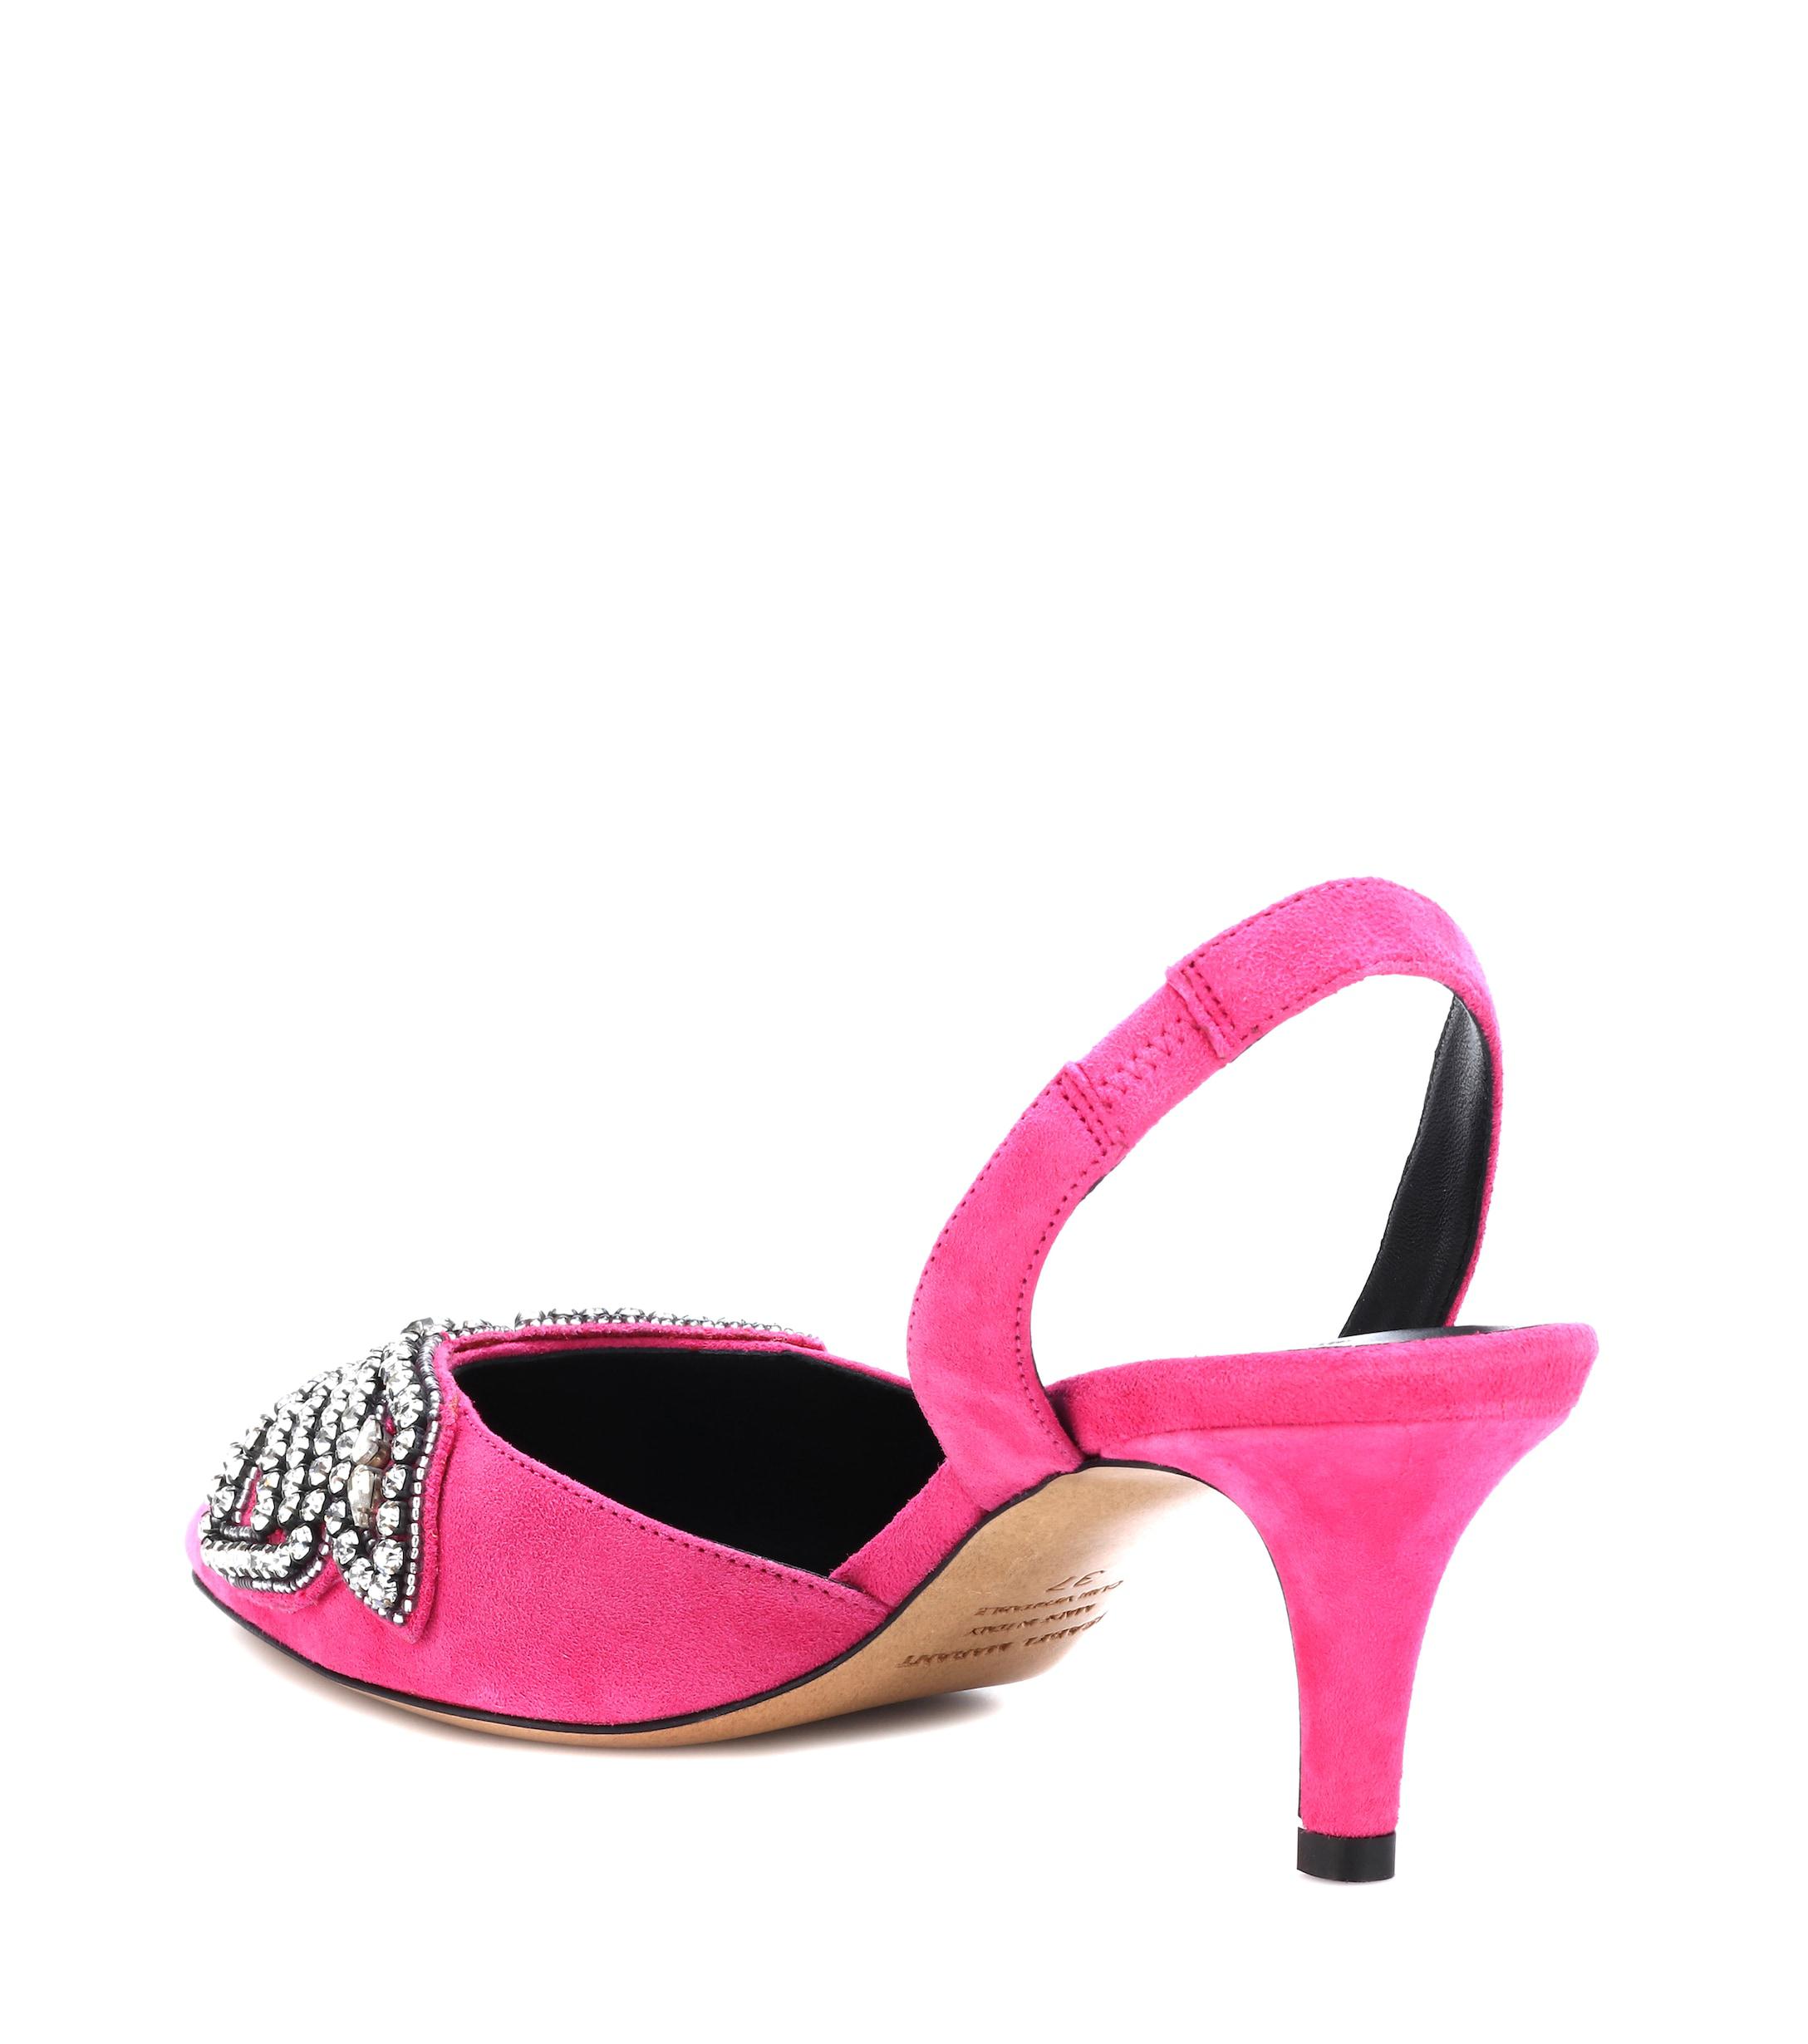 Isabel Marant Pagda Suede Slingback Pumps in Pink - Lyst